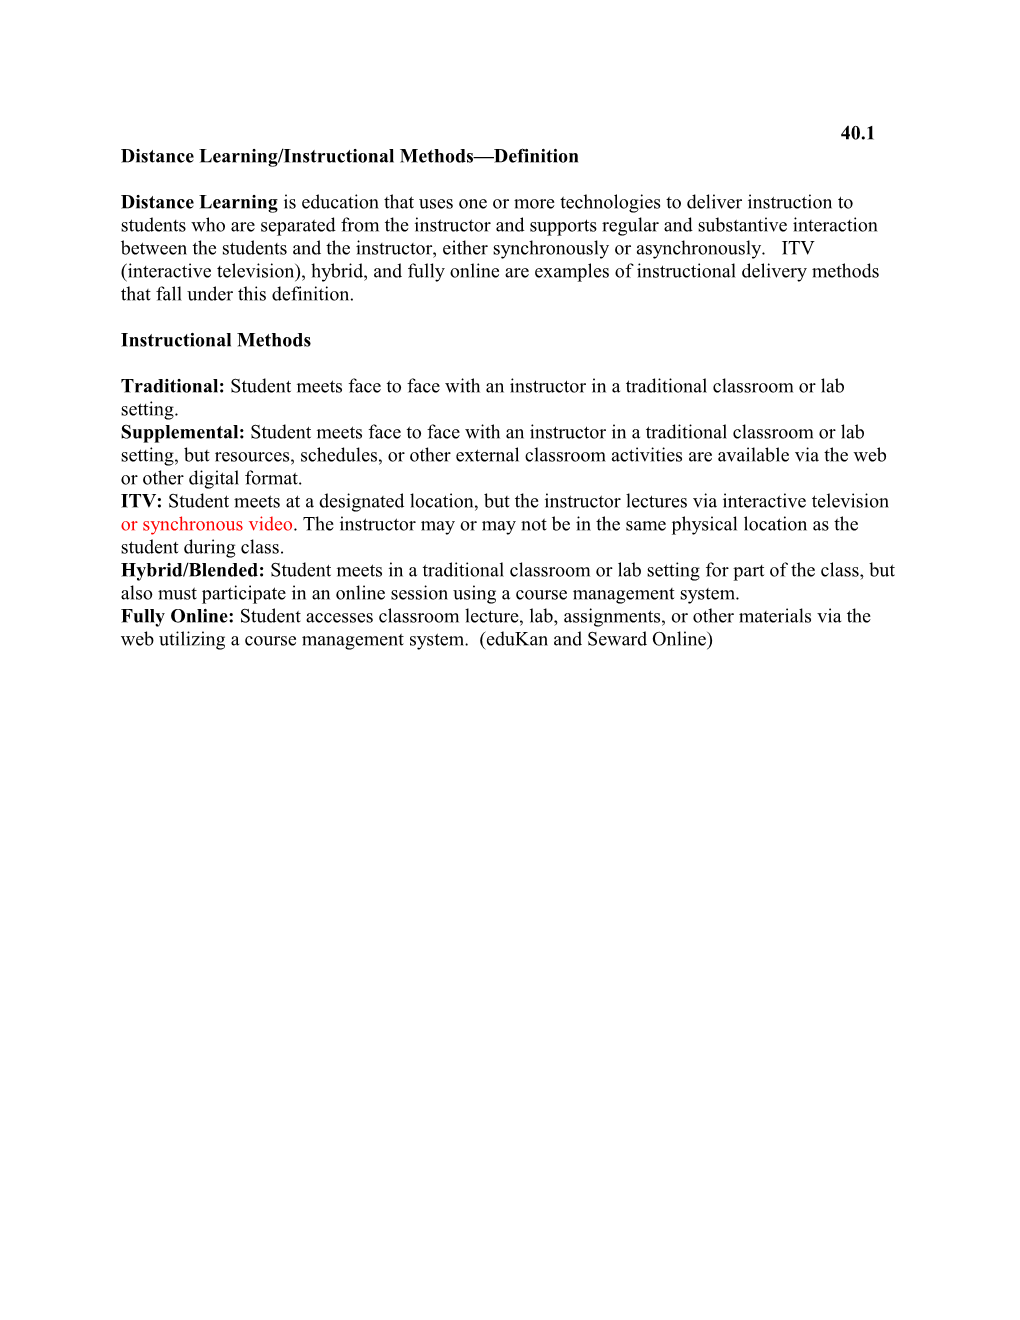 Distance Learning/Instructional Methods Definition